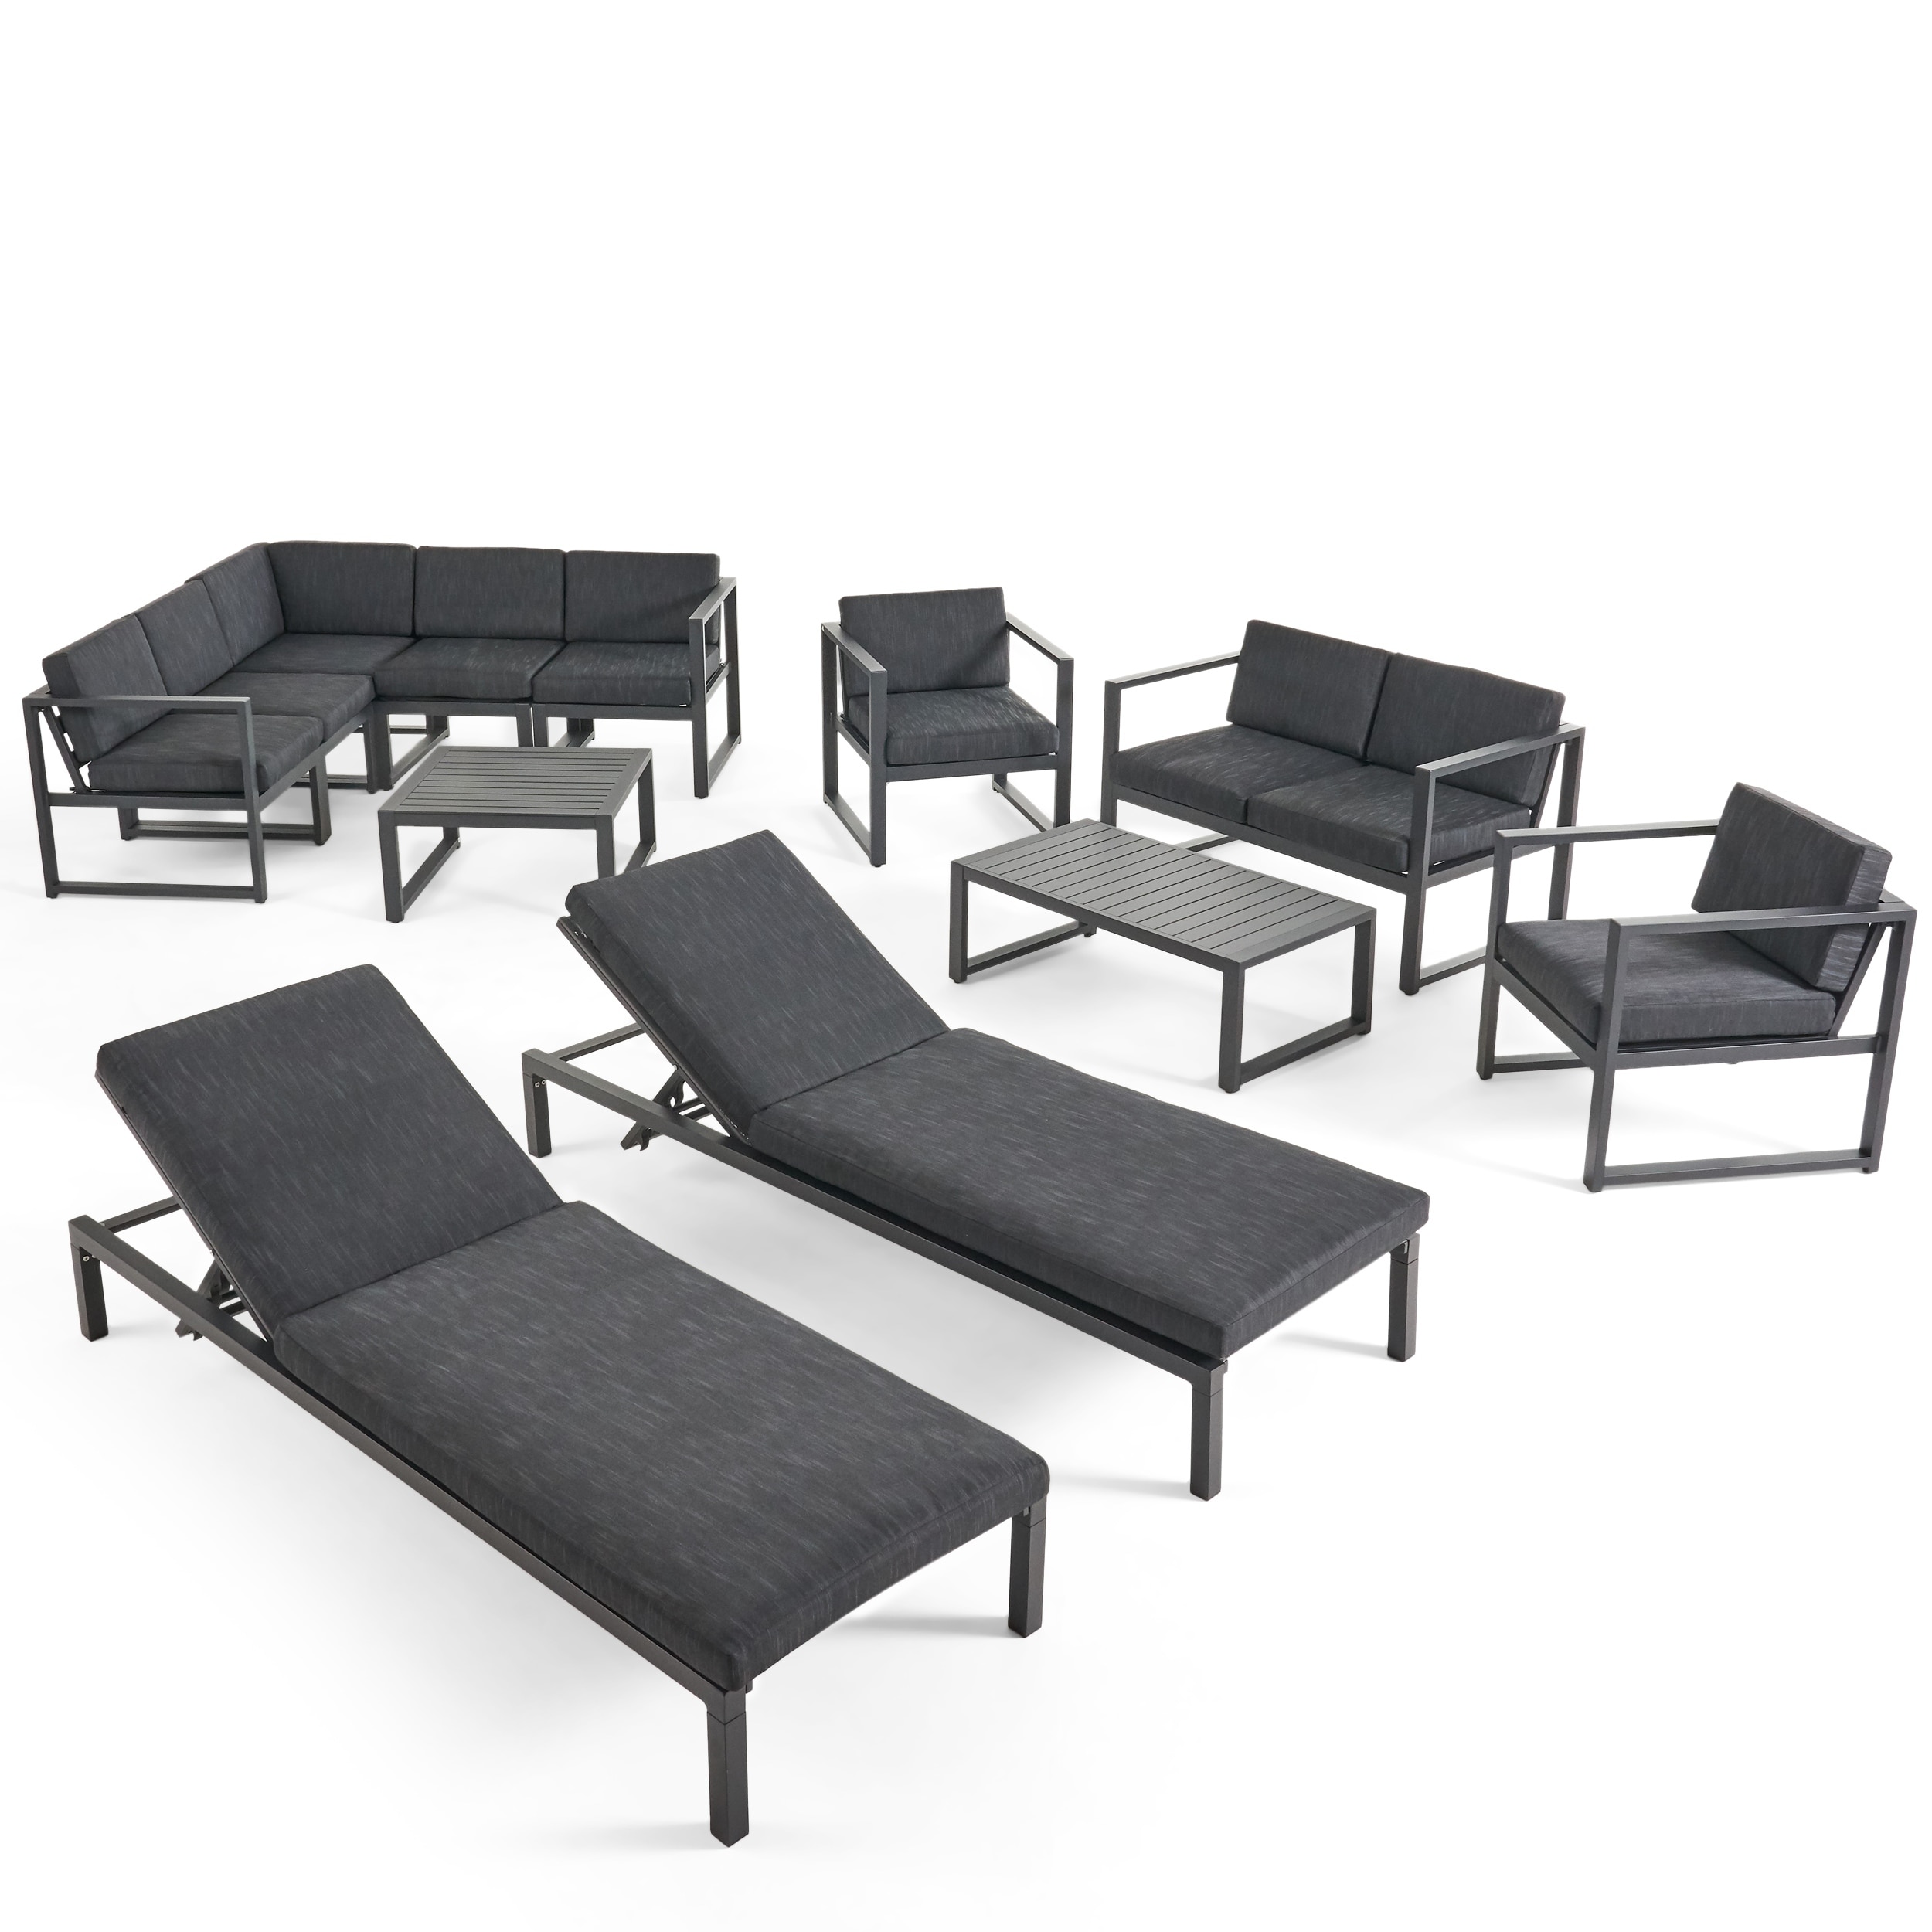 Navan Outdoor 9 Seater Aluminum Sectional Sofa Set With Mesh Chaise Lounges By Christopher Knight Home